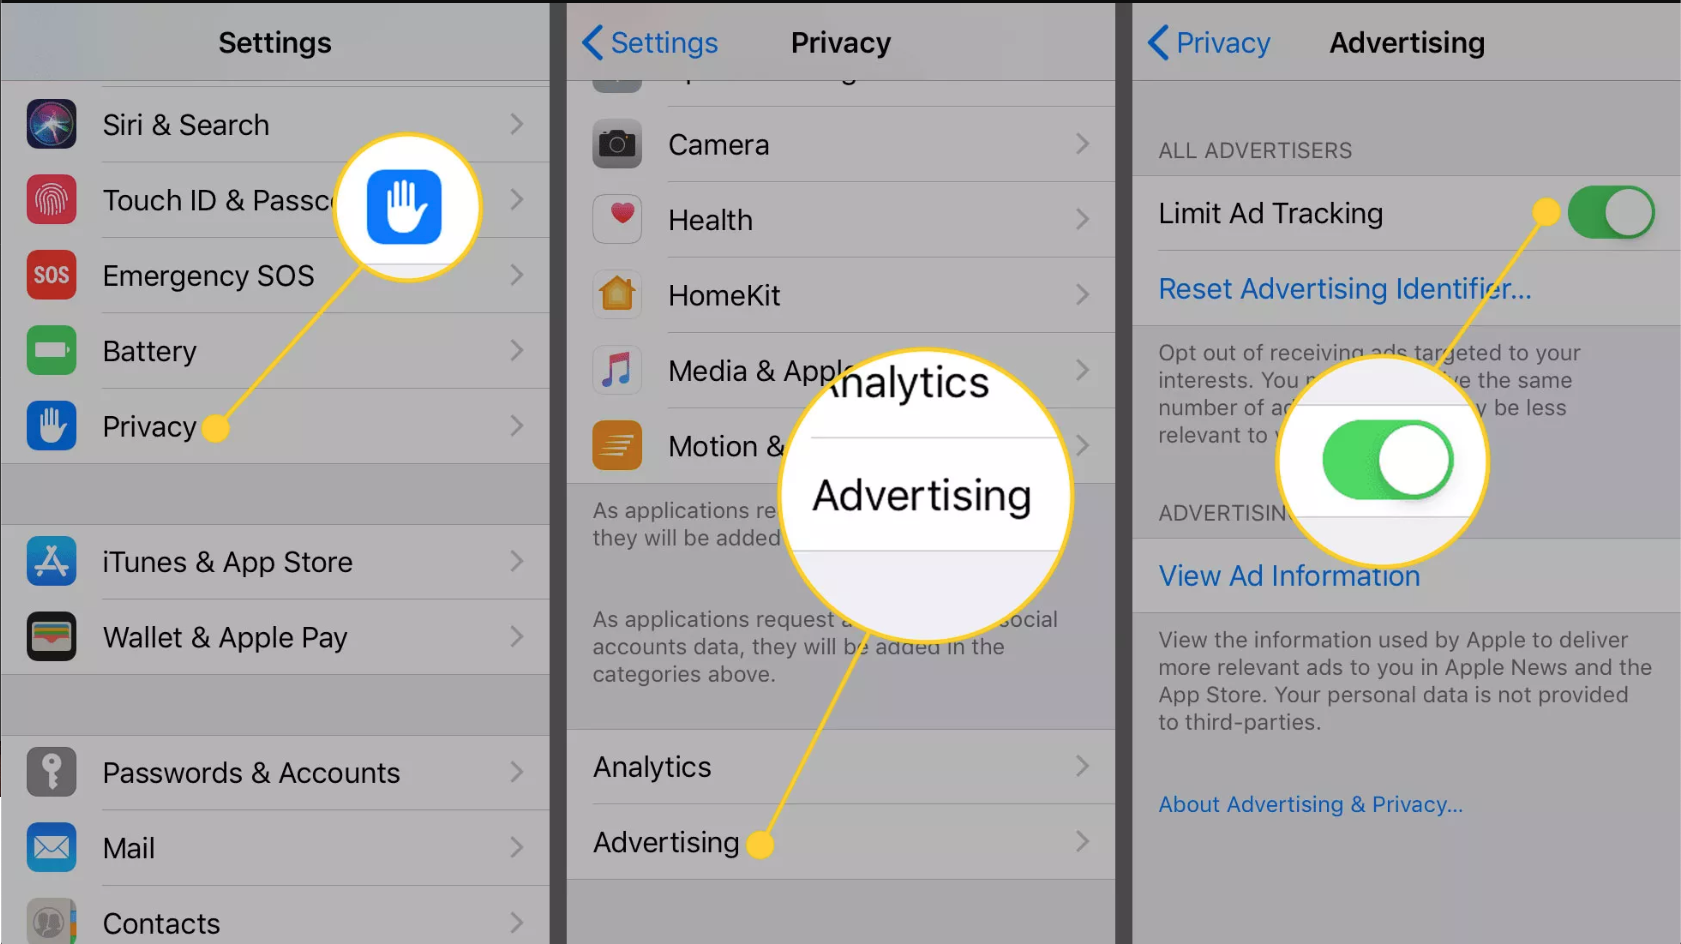 Privacy, Advertising, and Limit Ad Tracking options in iOS Settings